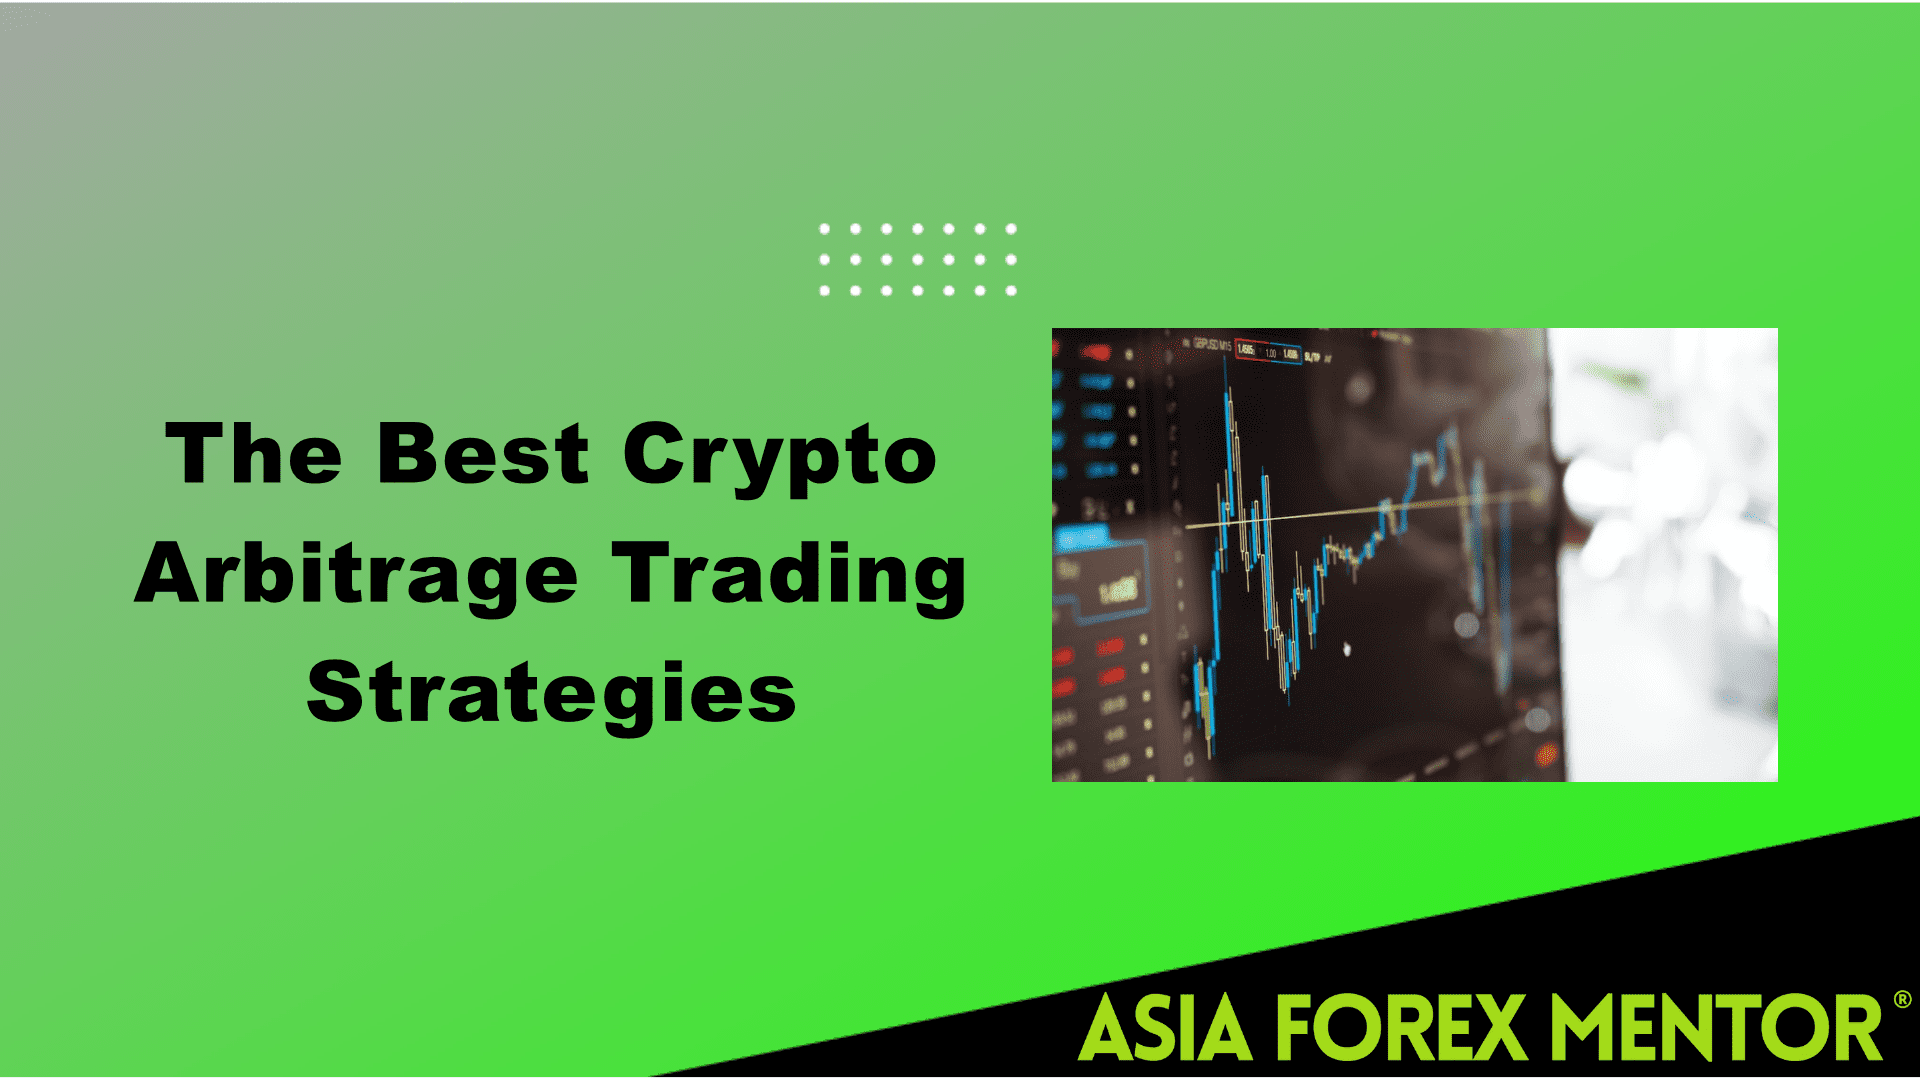 Trading and arbitrage in cryptocurrency markets